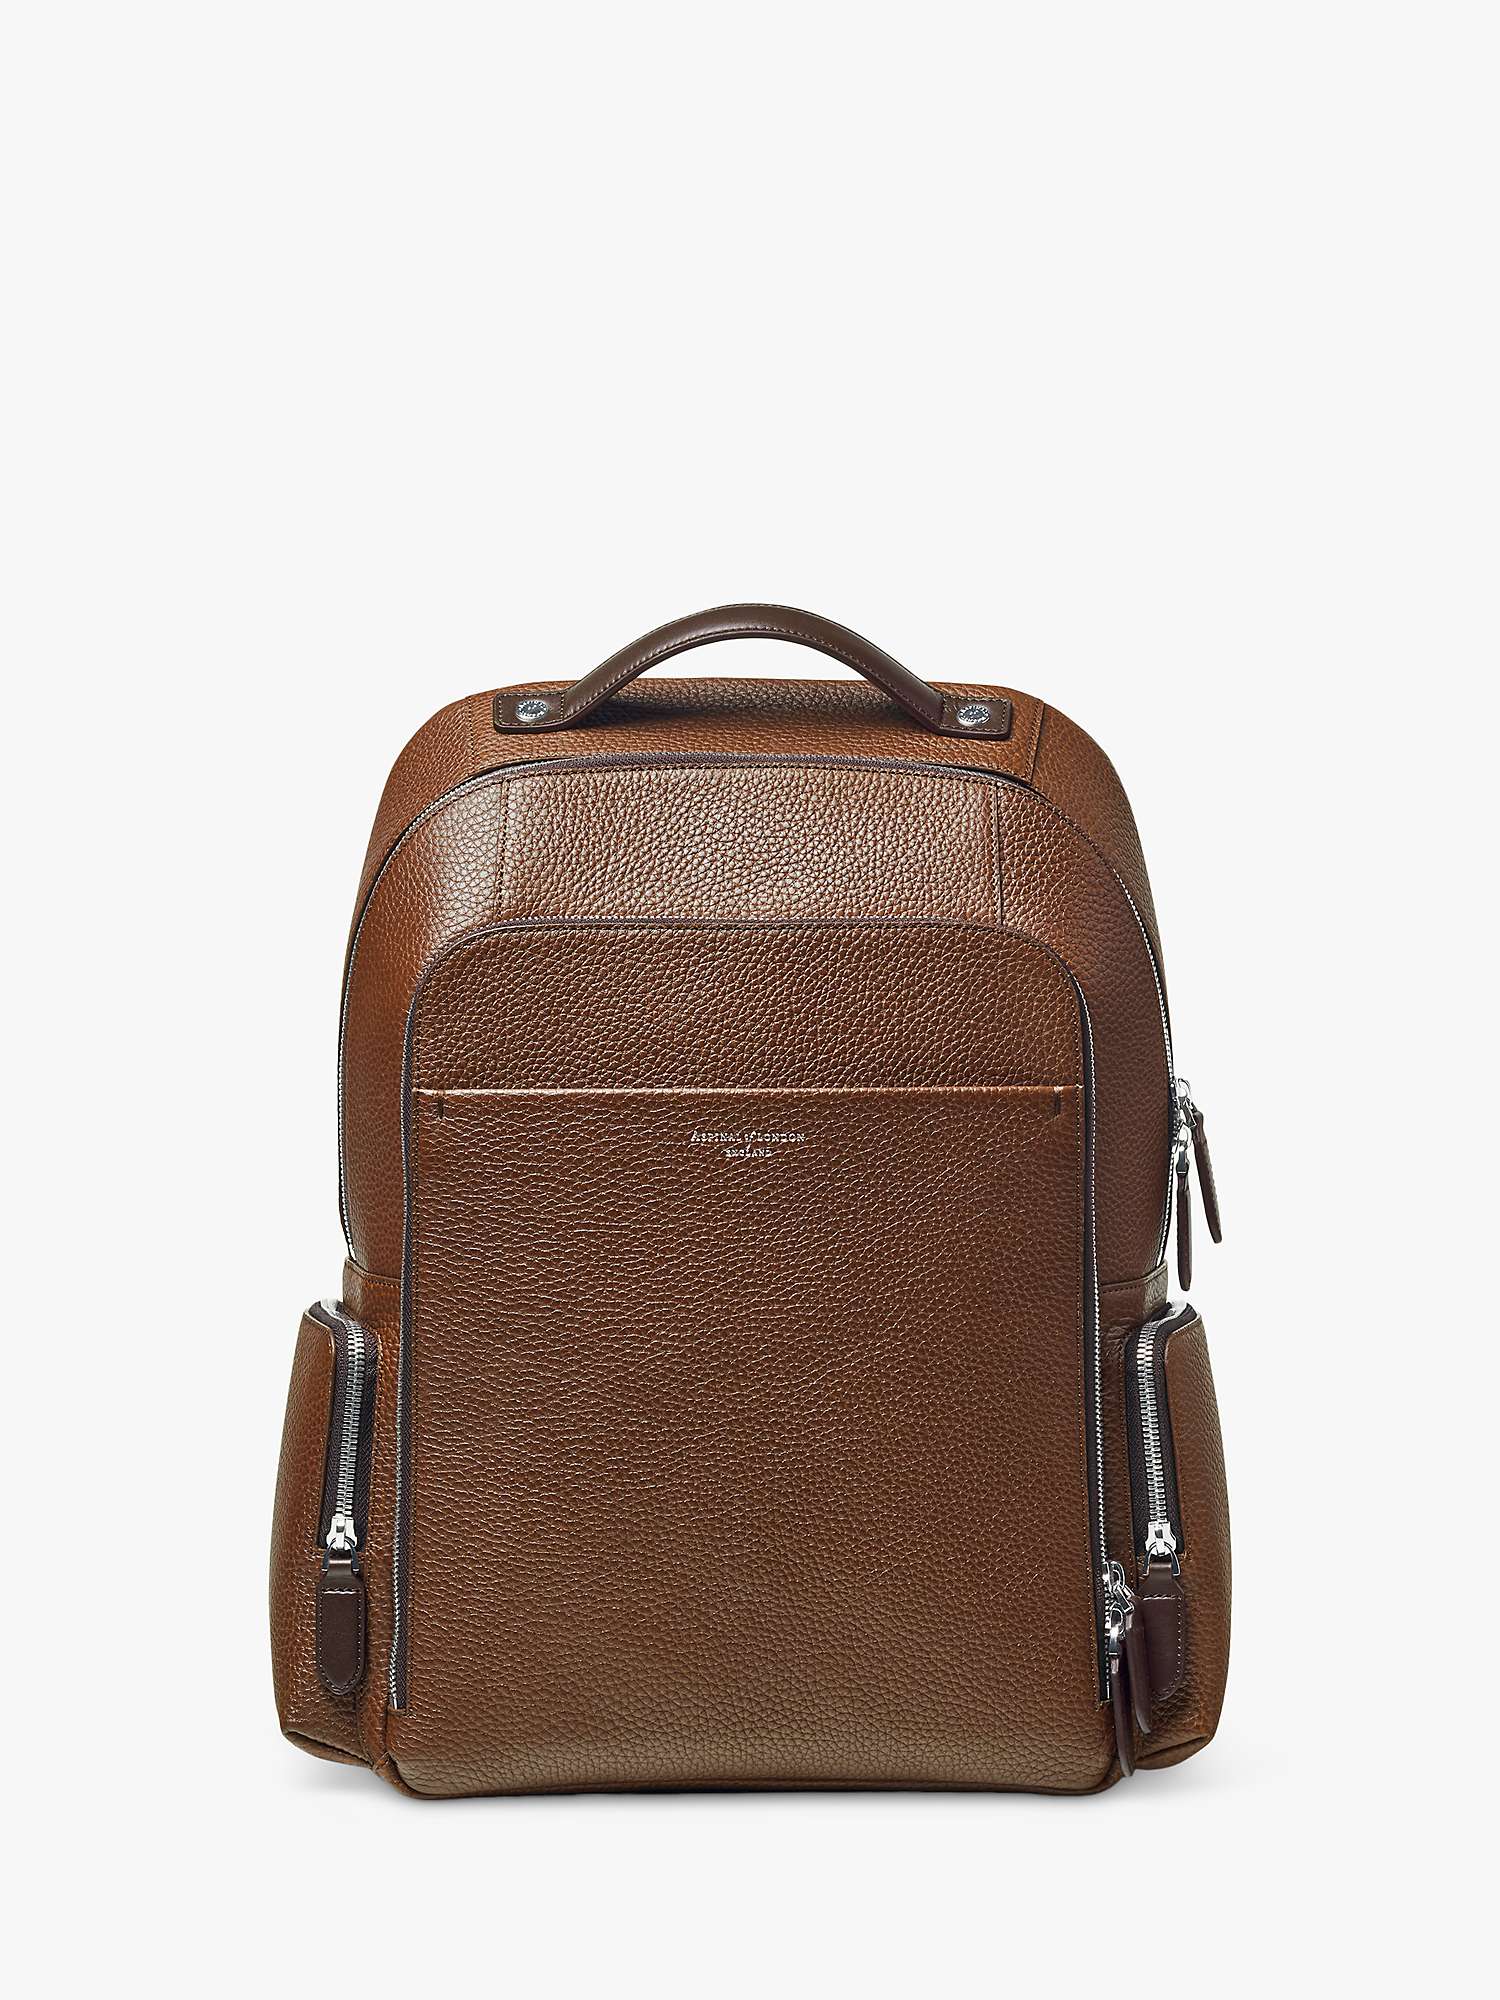 Buy Aspinal of London Reporter Zip Pebble Leather Backpack Online at johnlewis.com